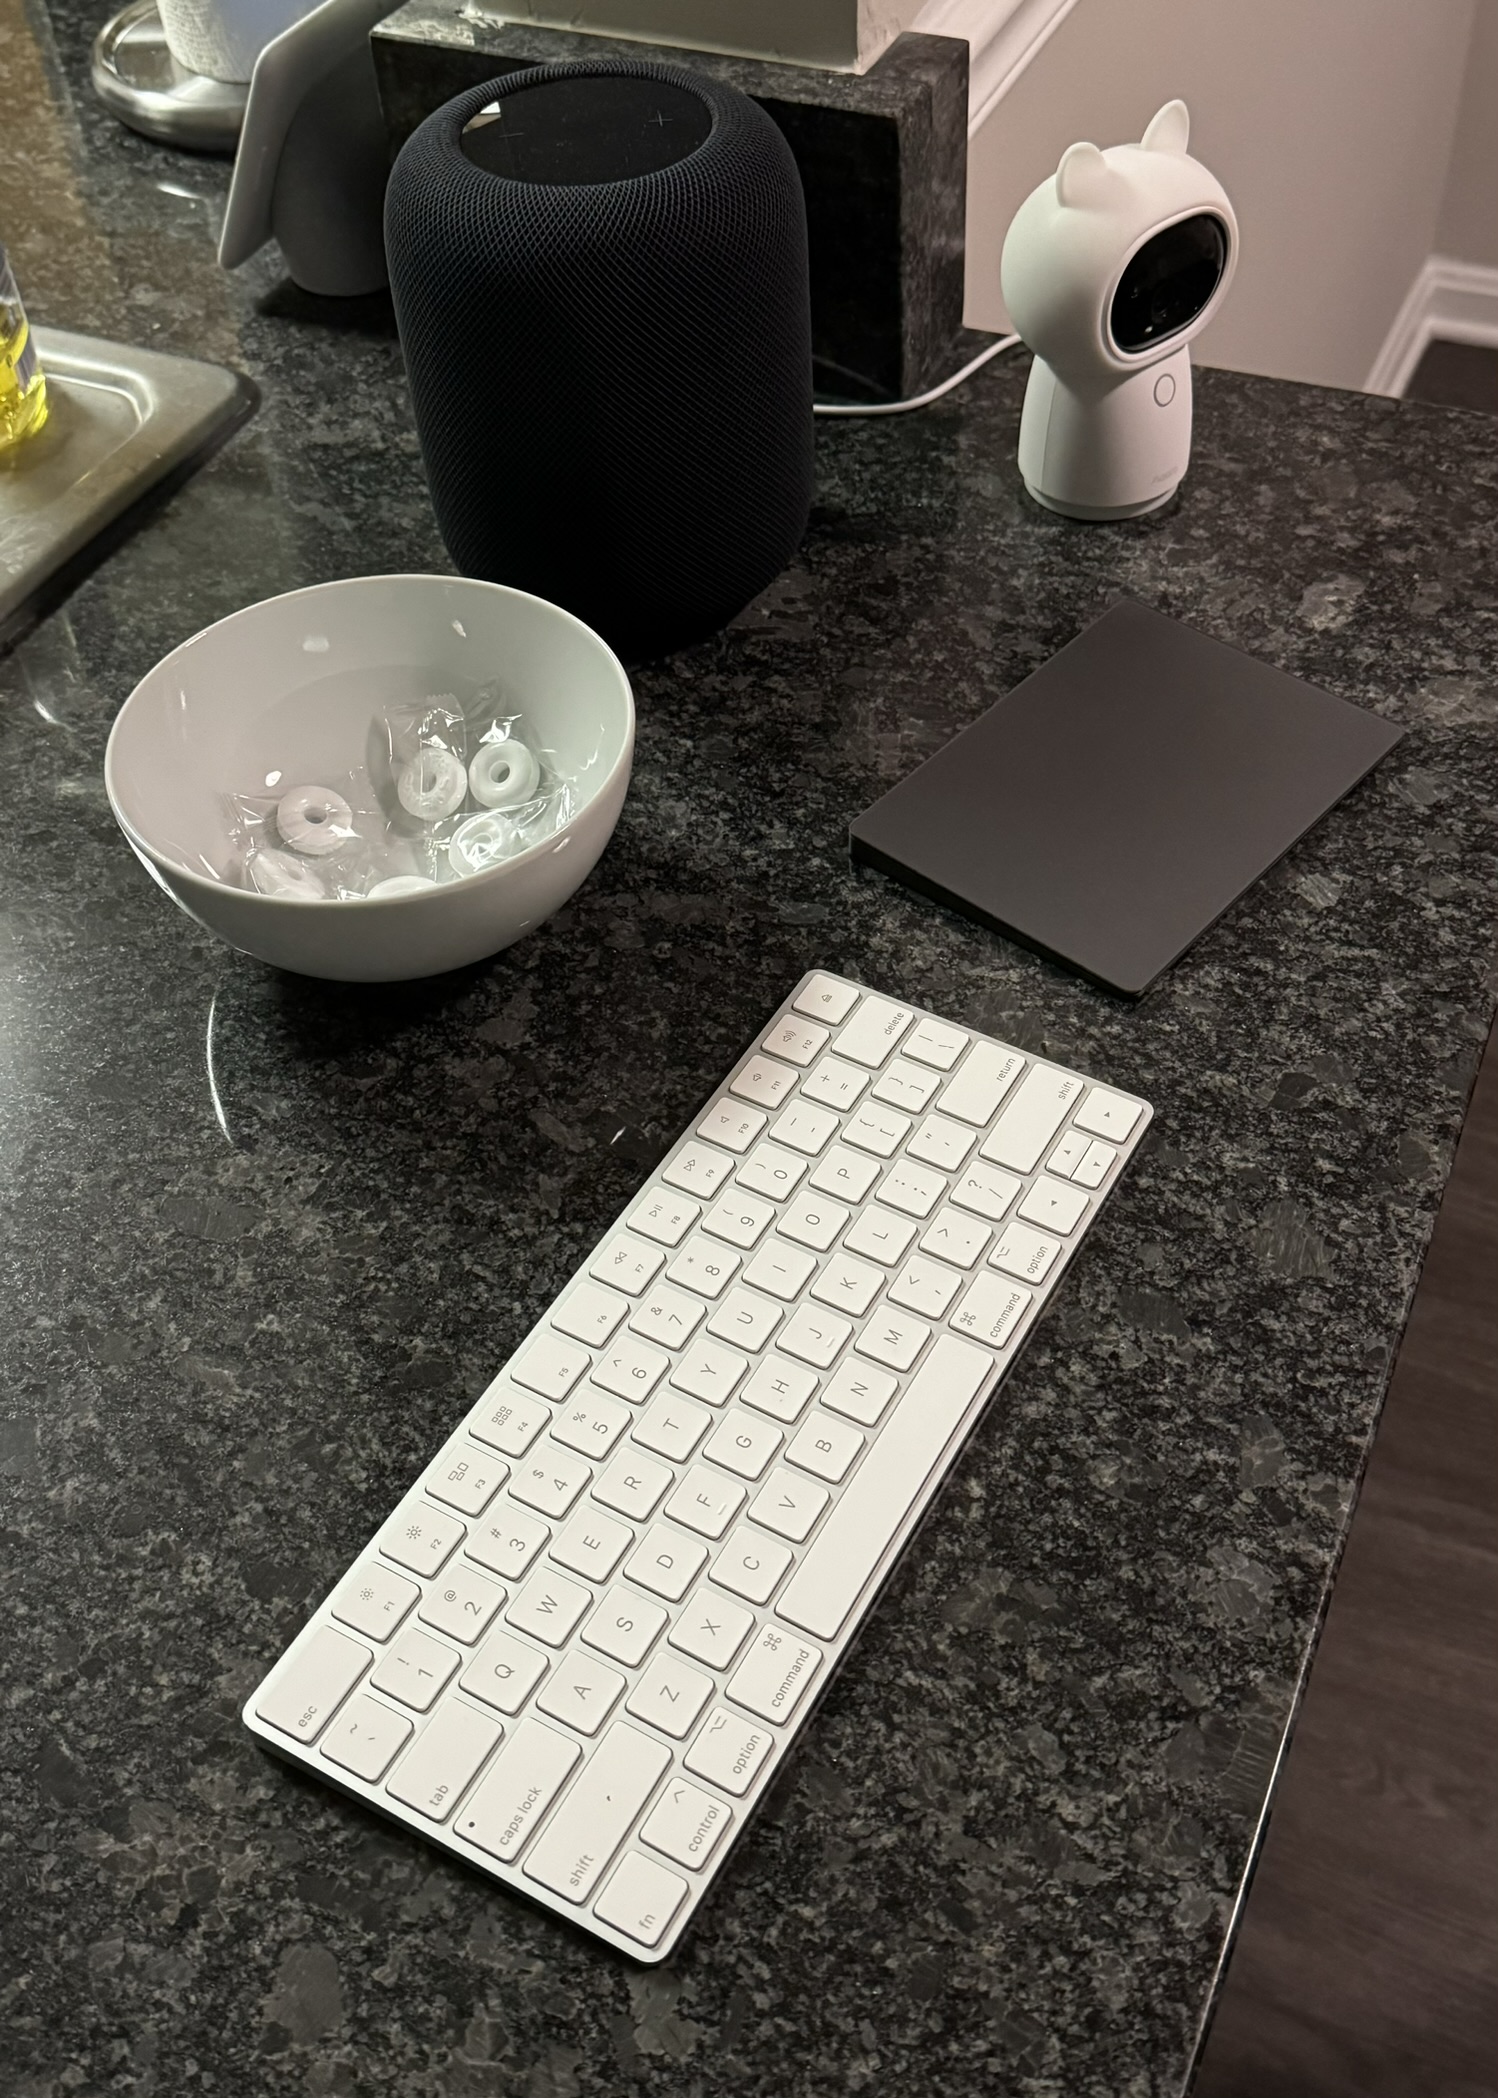 Photo of a white Magic Keyboard and space gray Magic Trackpad sit on a kitchen counter in front of a bowl of Life Savers and a HomePod and next to an Aqara G3 camera.